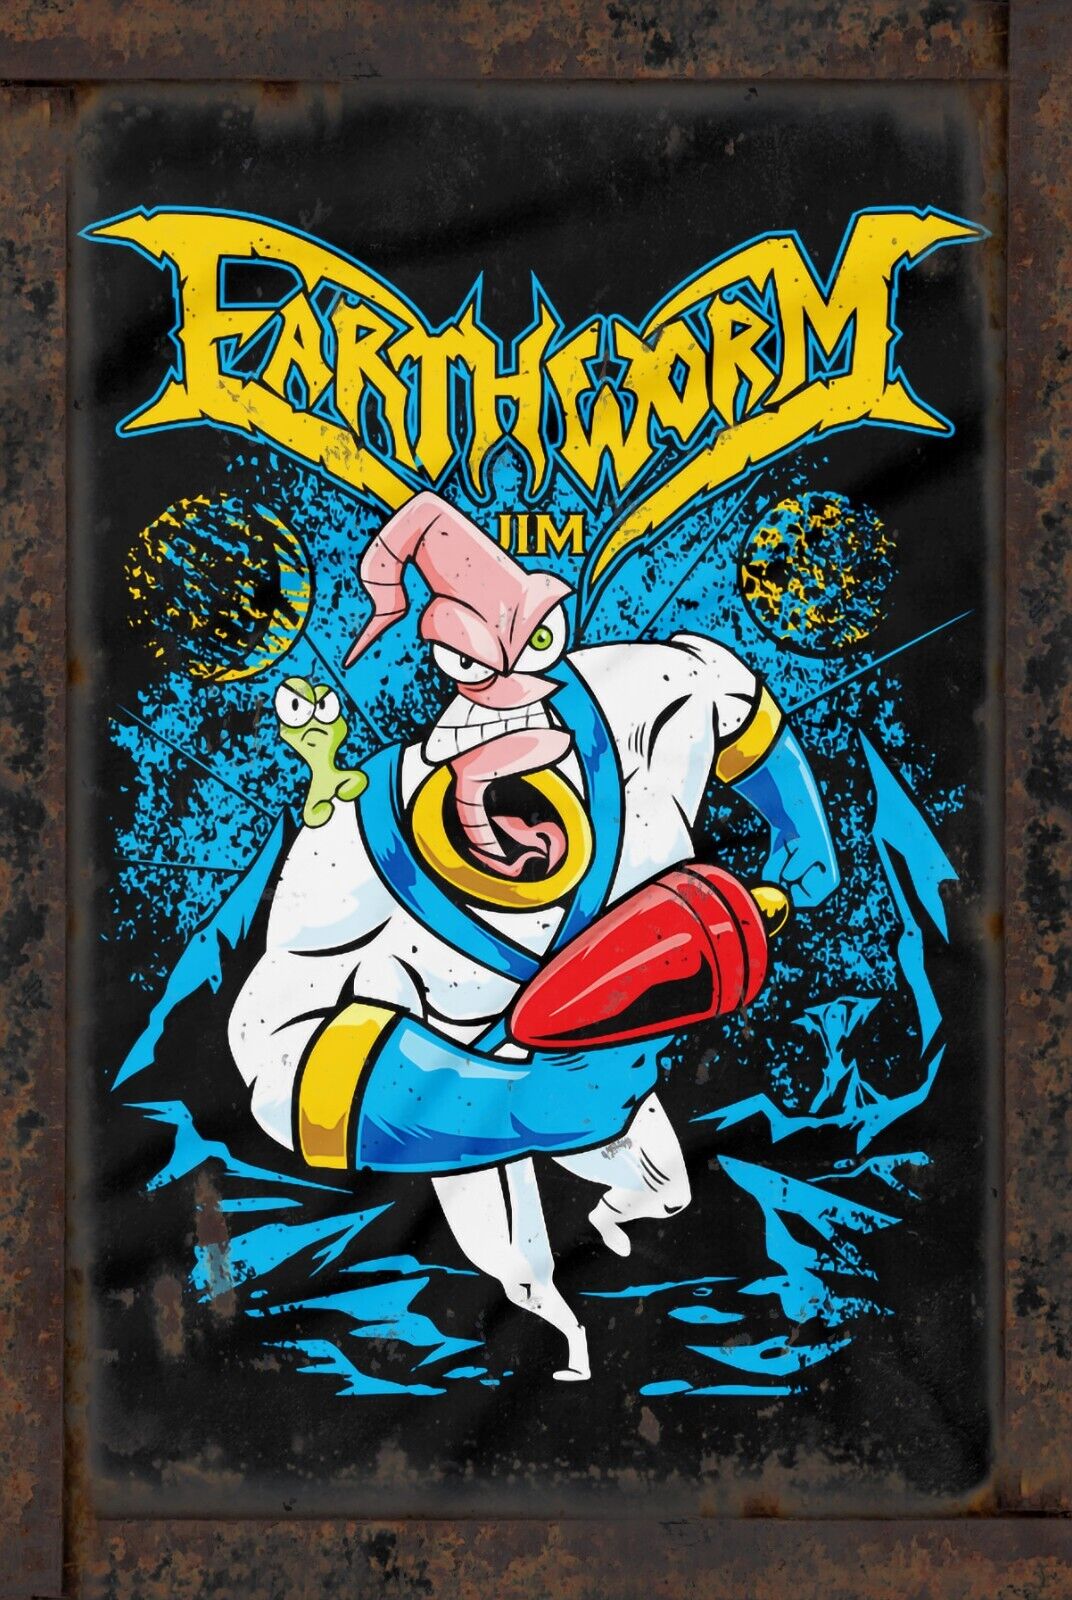 Earthworm Jim 8x12 Rustic Vintage Style Tin Sign Metal Poster